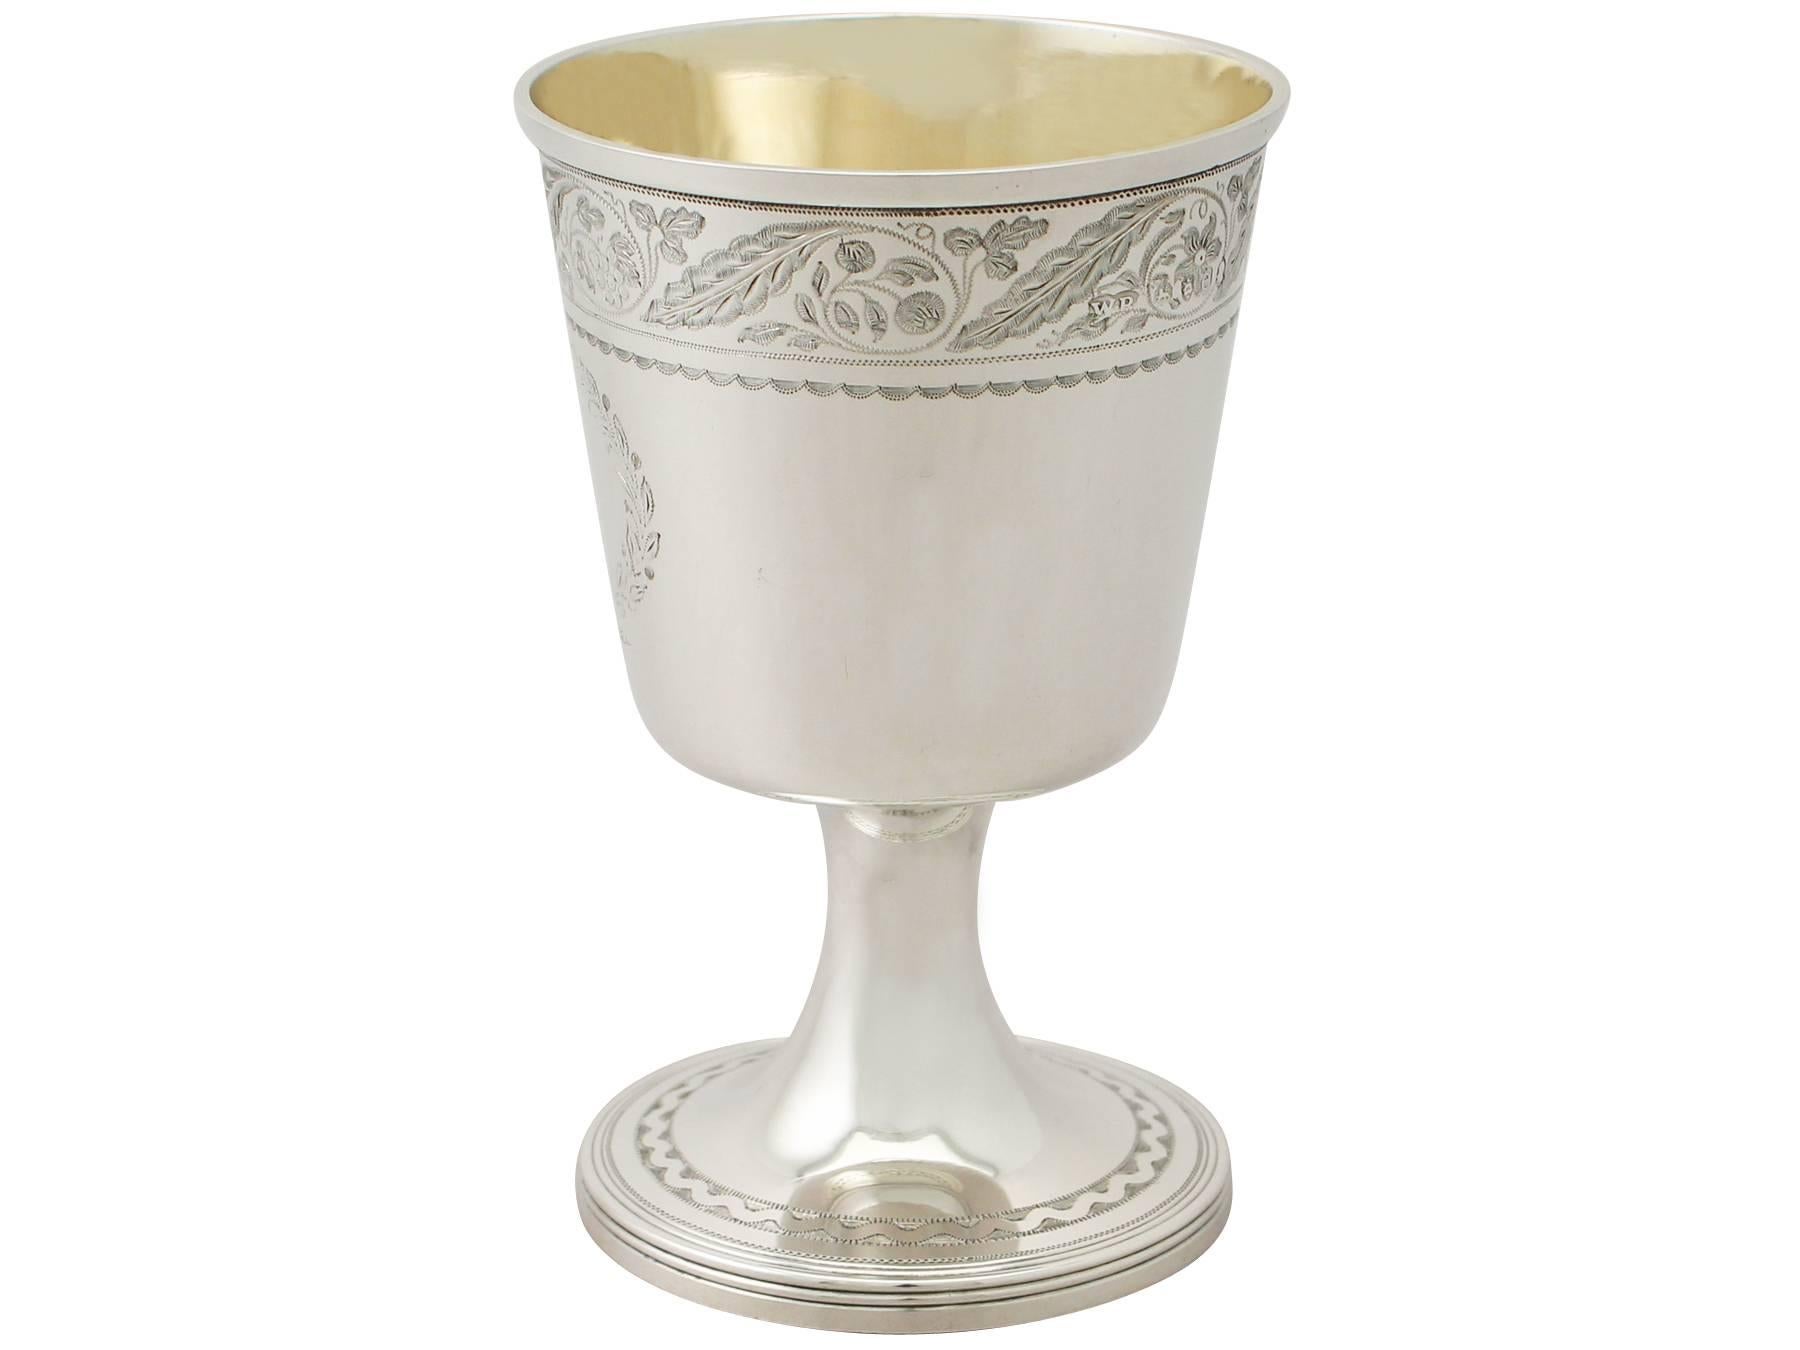 An exceptional, fine and impressive antique Victorian sterling silver goblet made by William Bateman I; an addition to our wine and drinks related silverware collection.

This exceptional antique George IV sterling silver goblet has a bell shaped